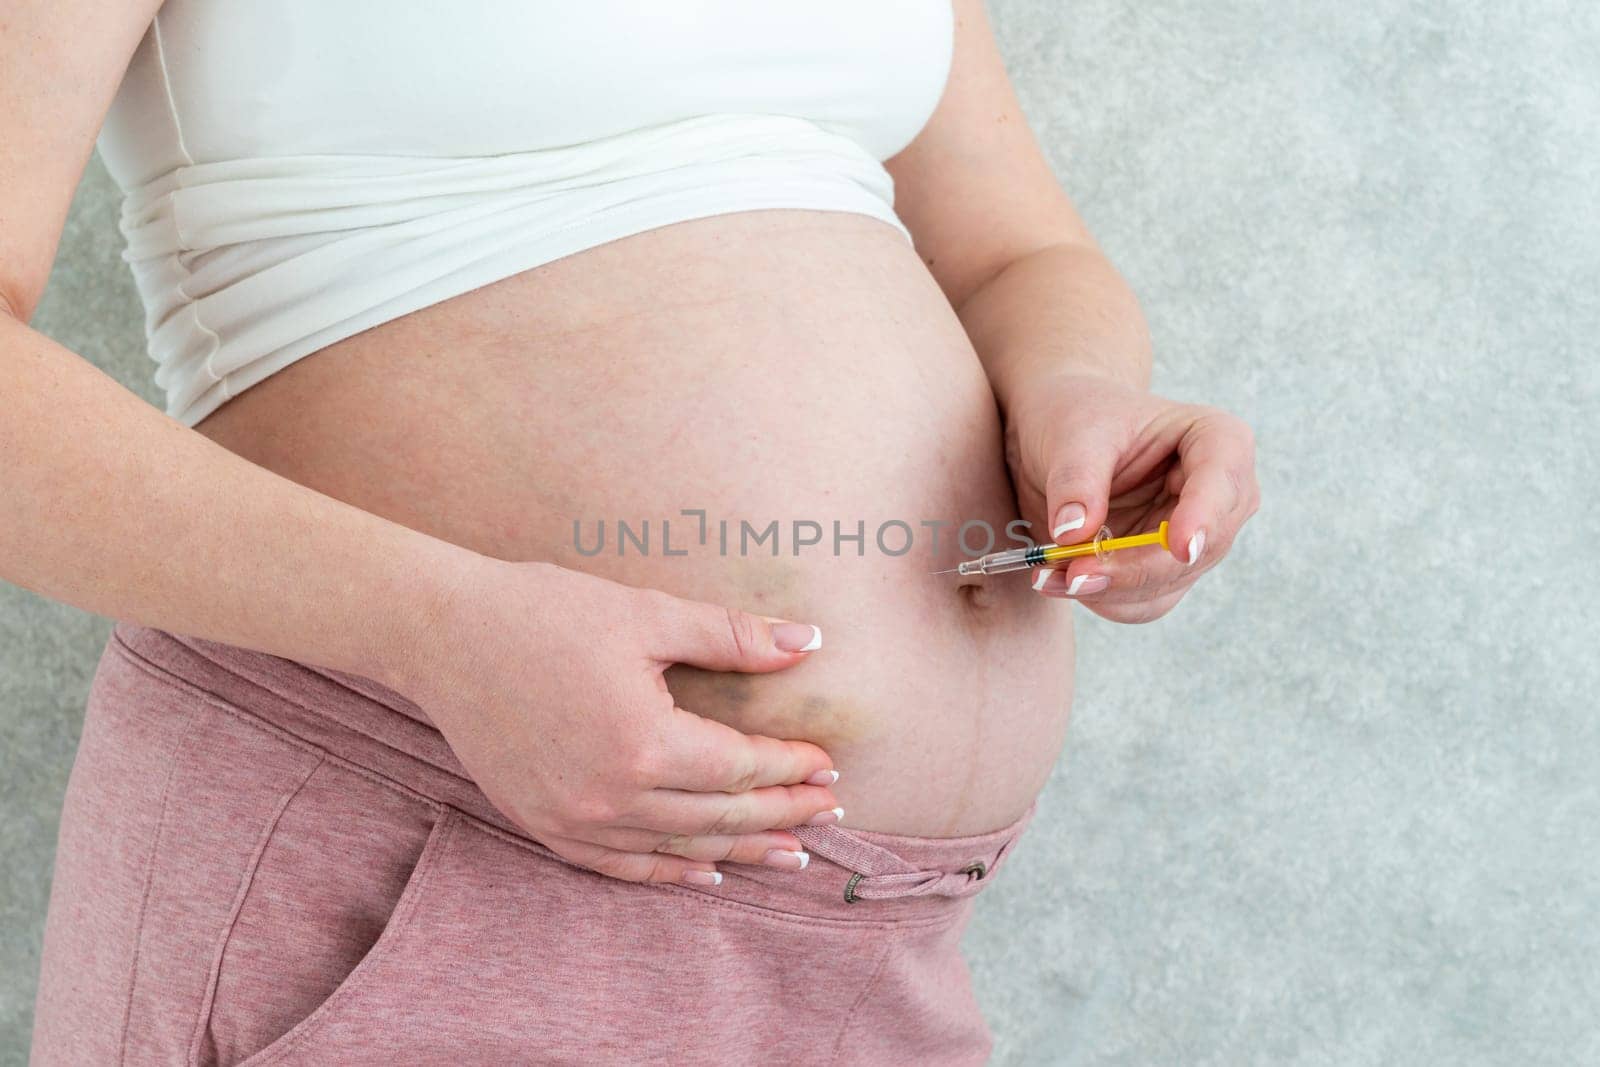 Pregnant woman making injection in stomach by Mariakray